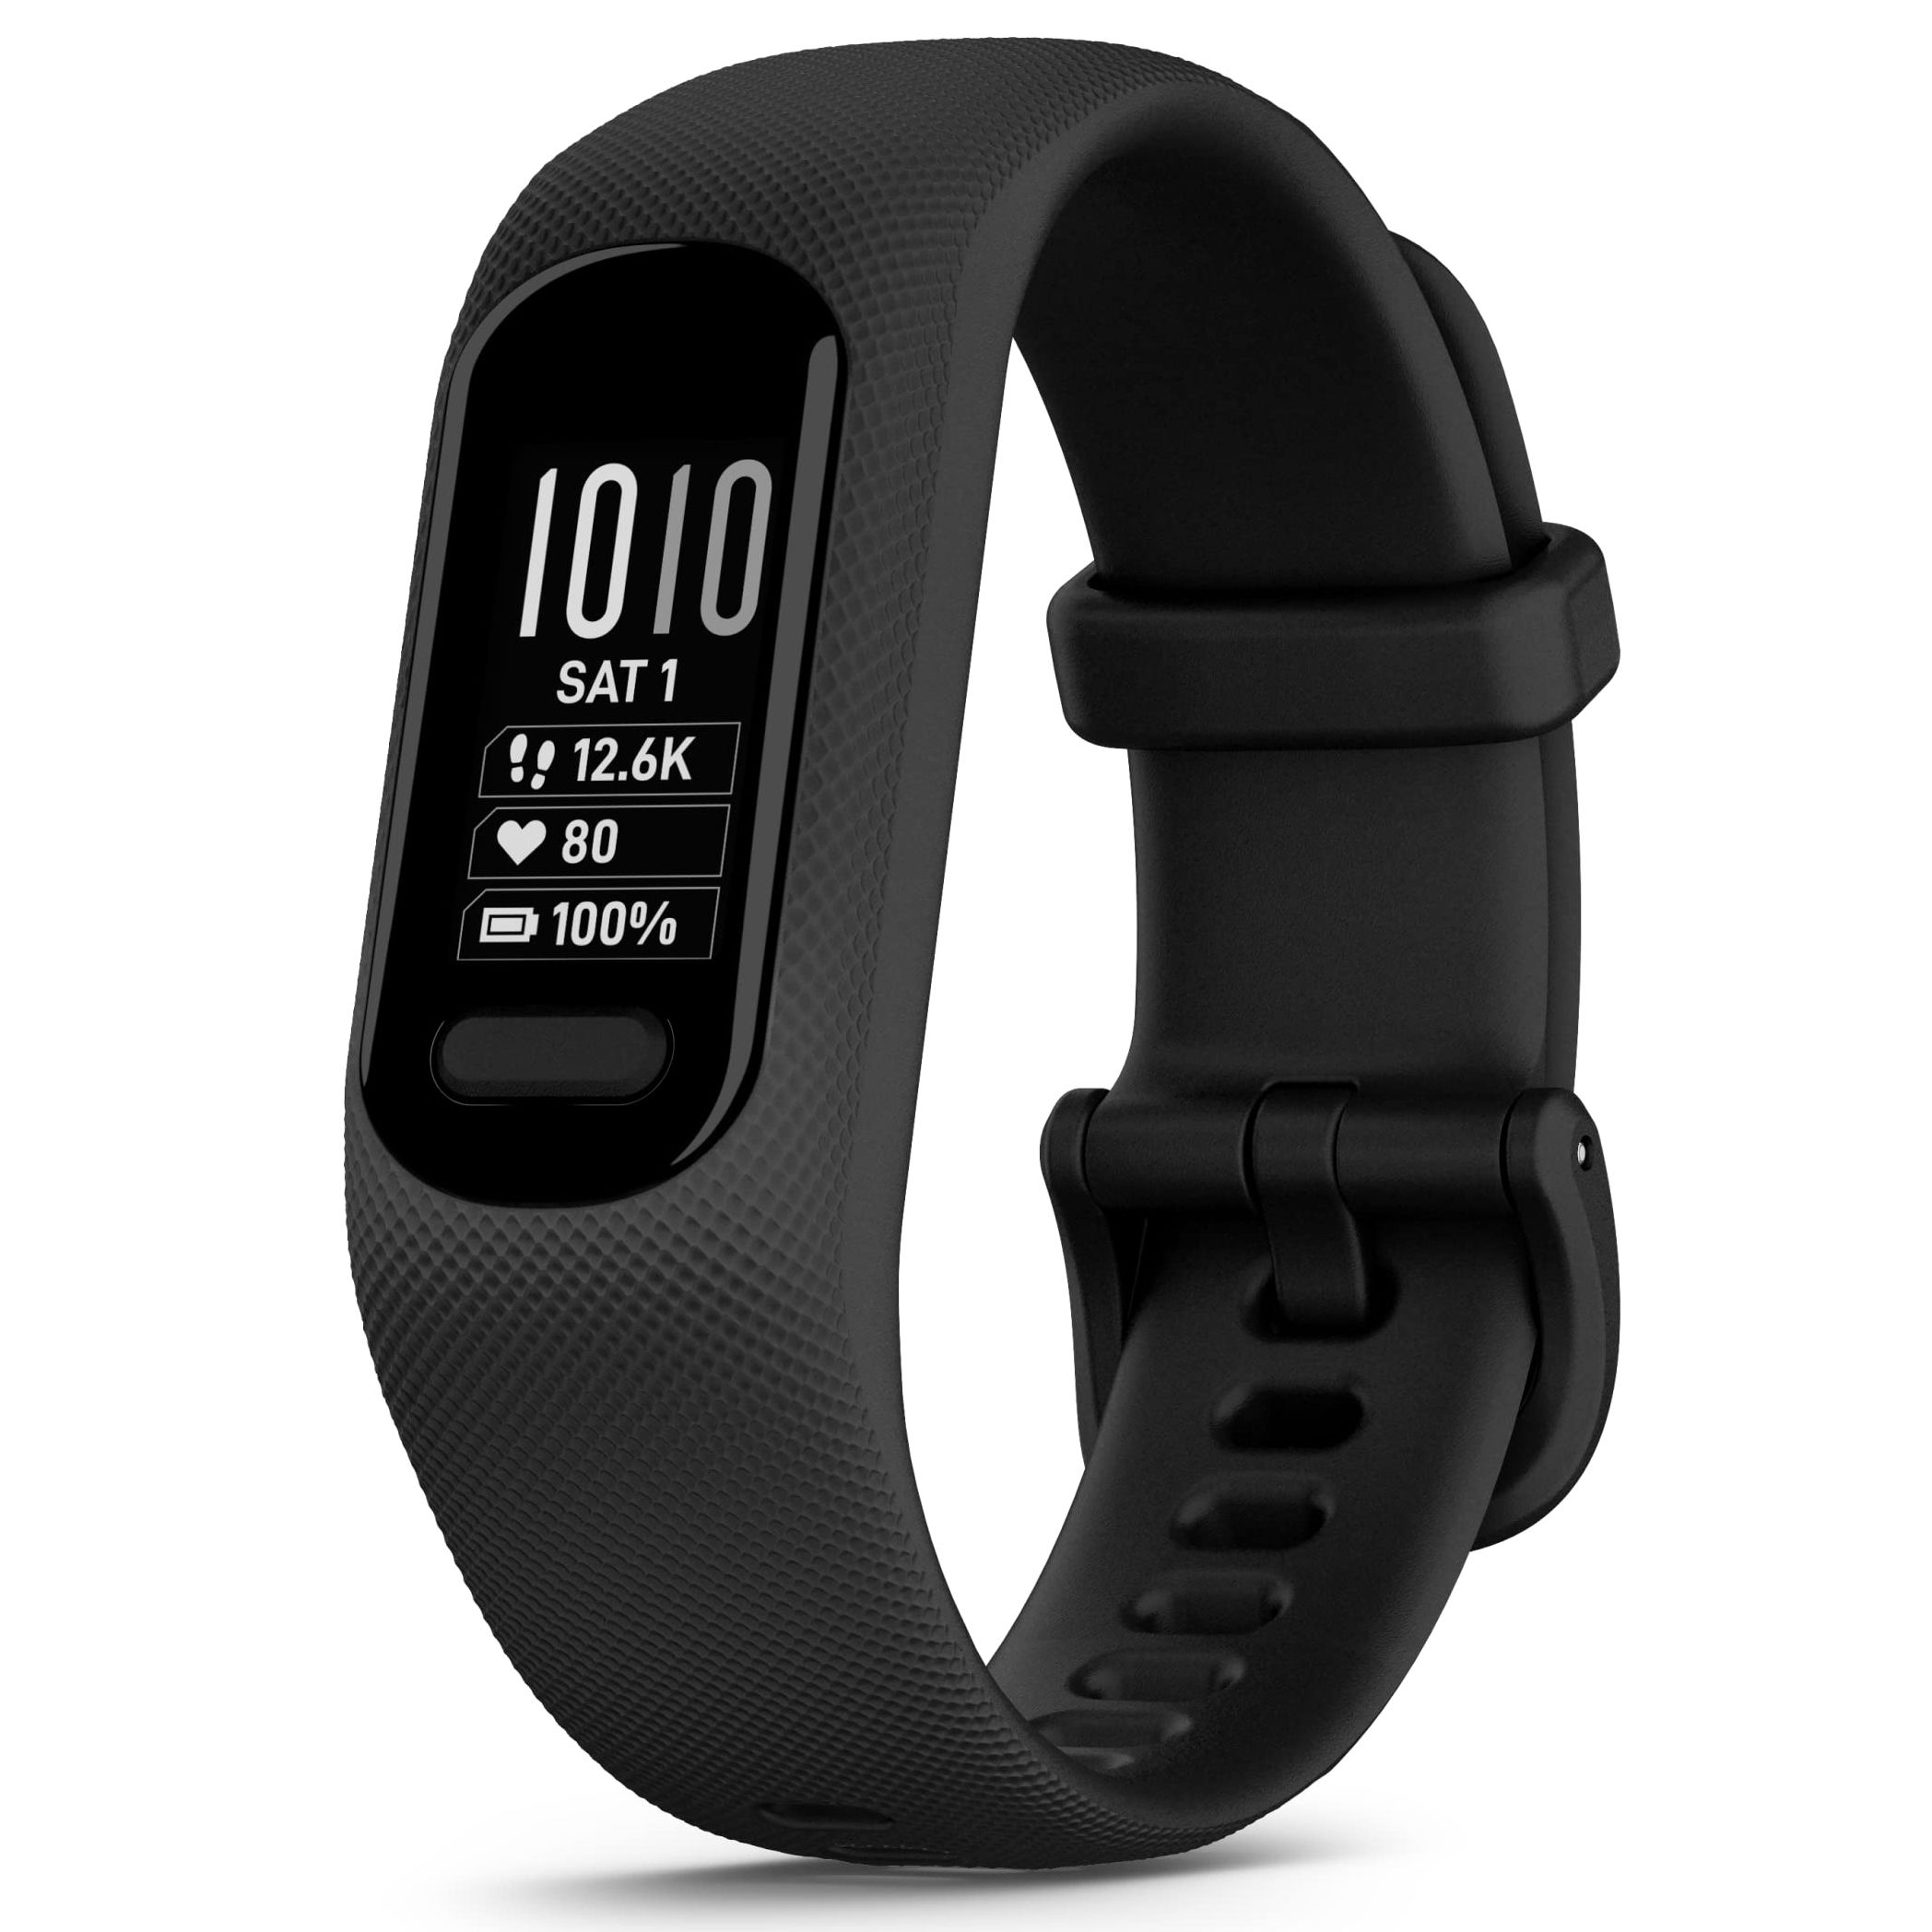 Xiaomi Redmi Smart Band 2: The Best Value Fitness Tracker on the